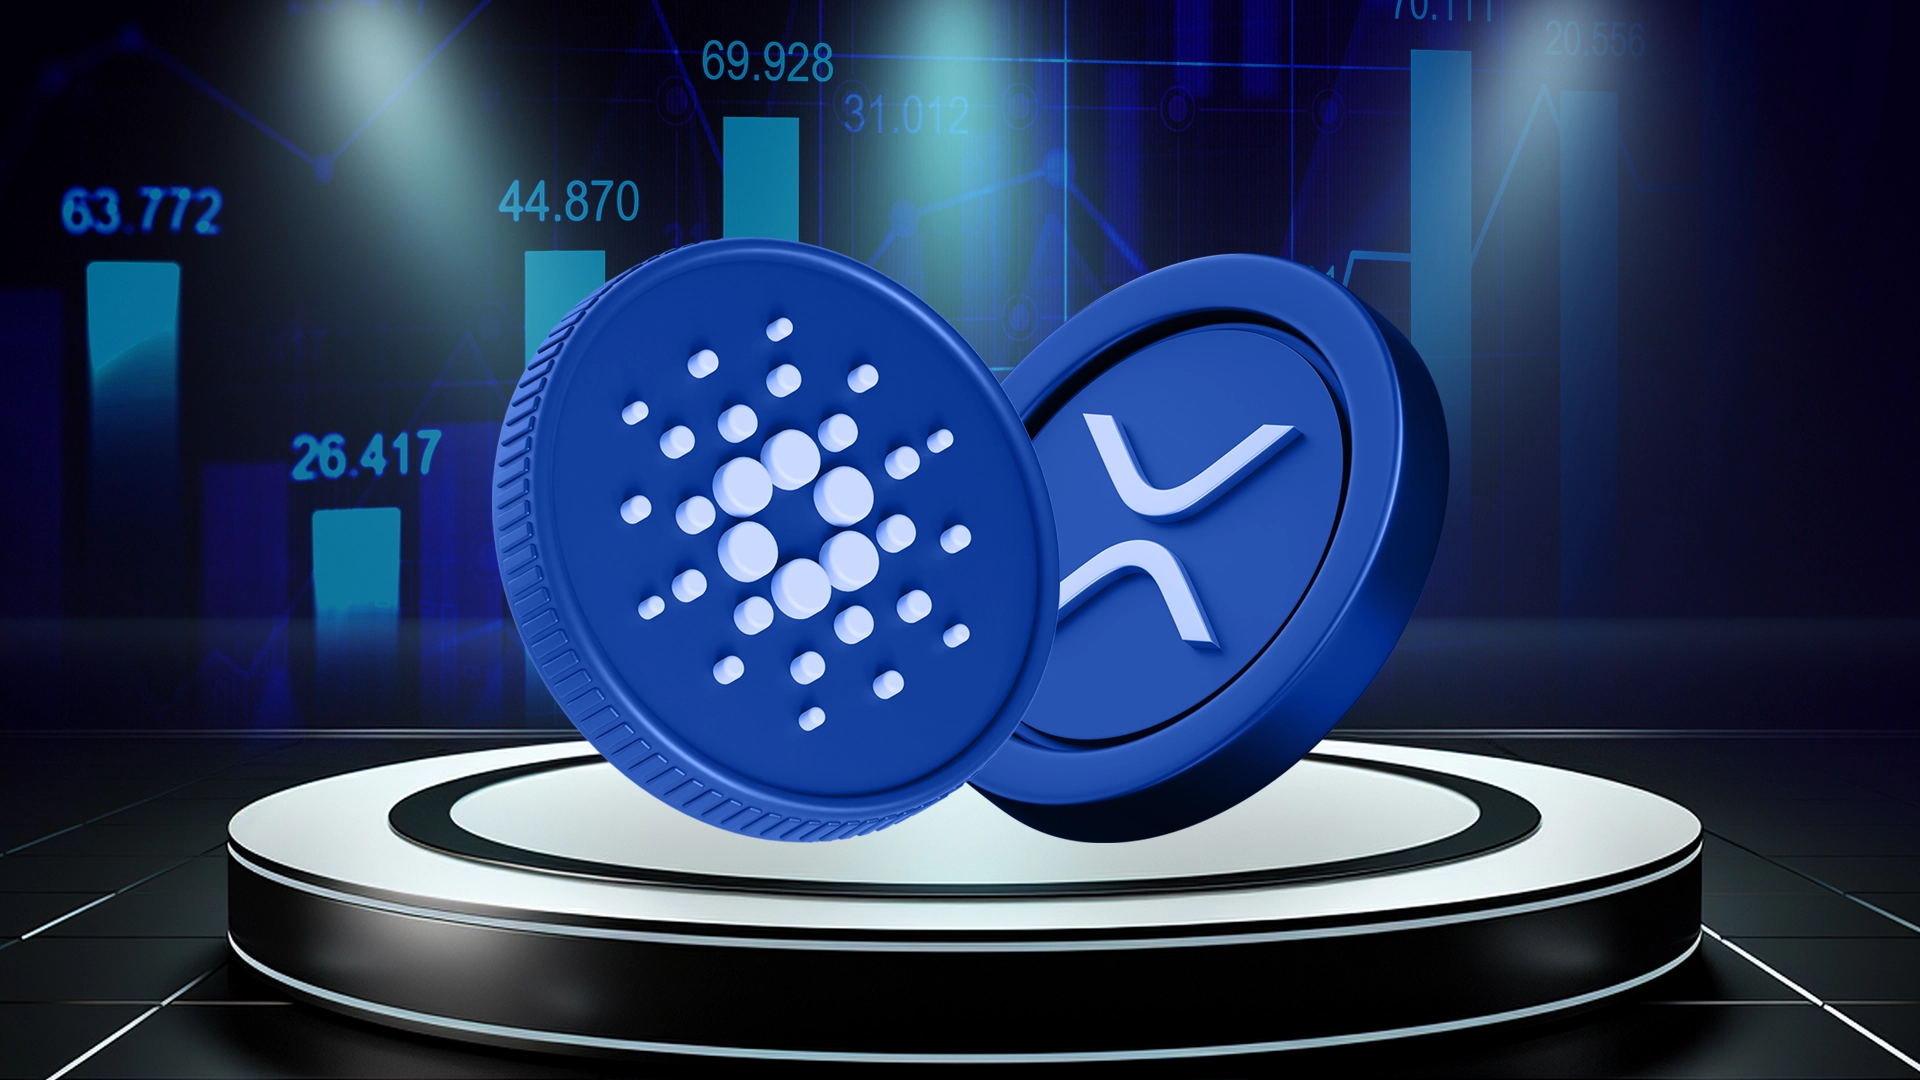 Could Cardano and XRP Price Turn Bullish? Here's An Outlook